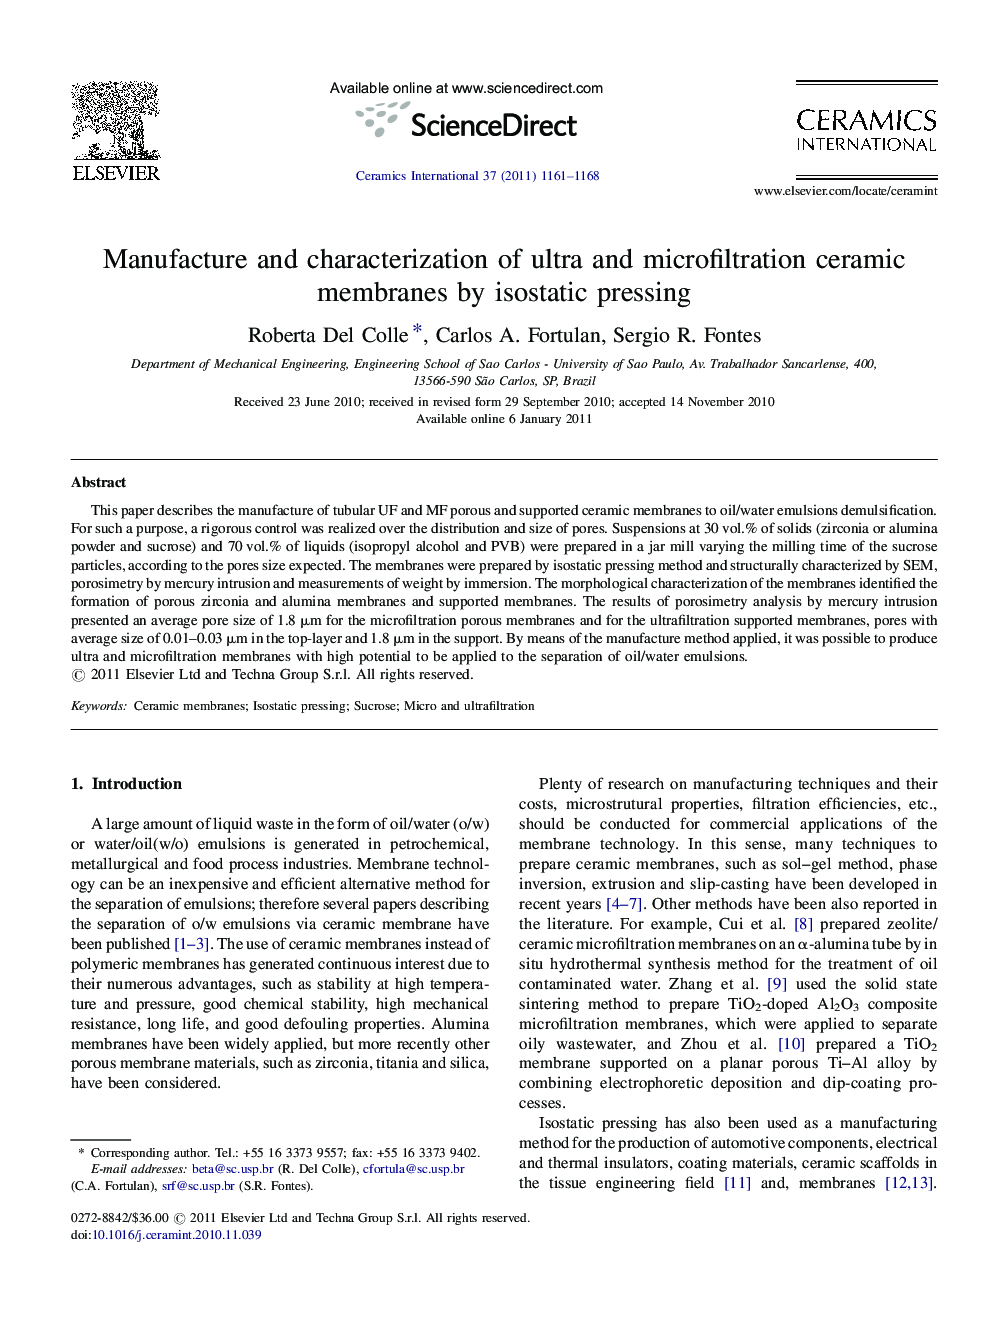 Manufacture and characterization of ultra and microfiltration ceramic membranes by isostatic pressing